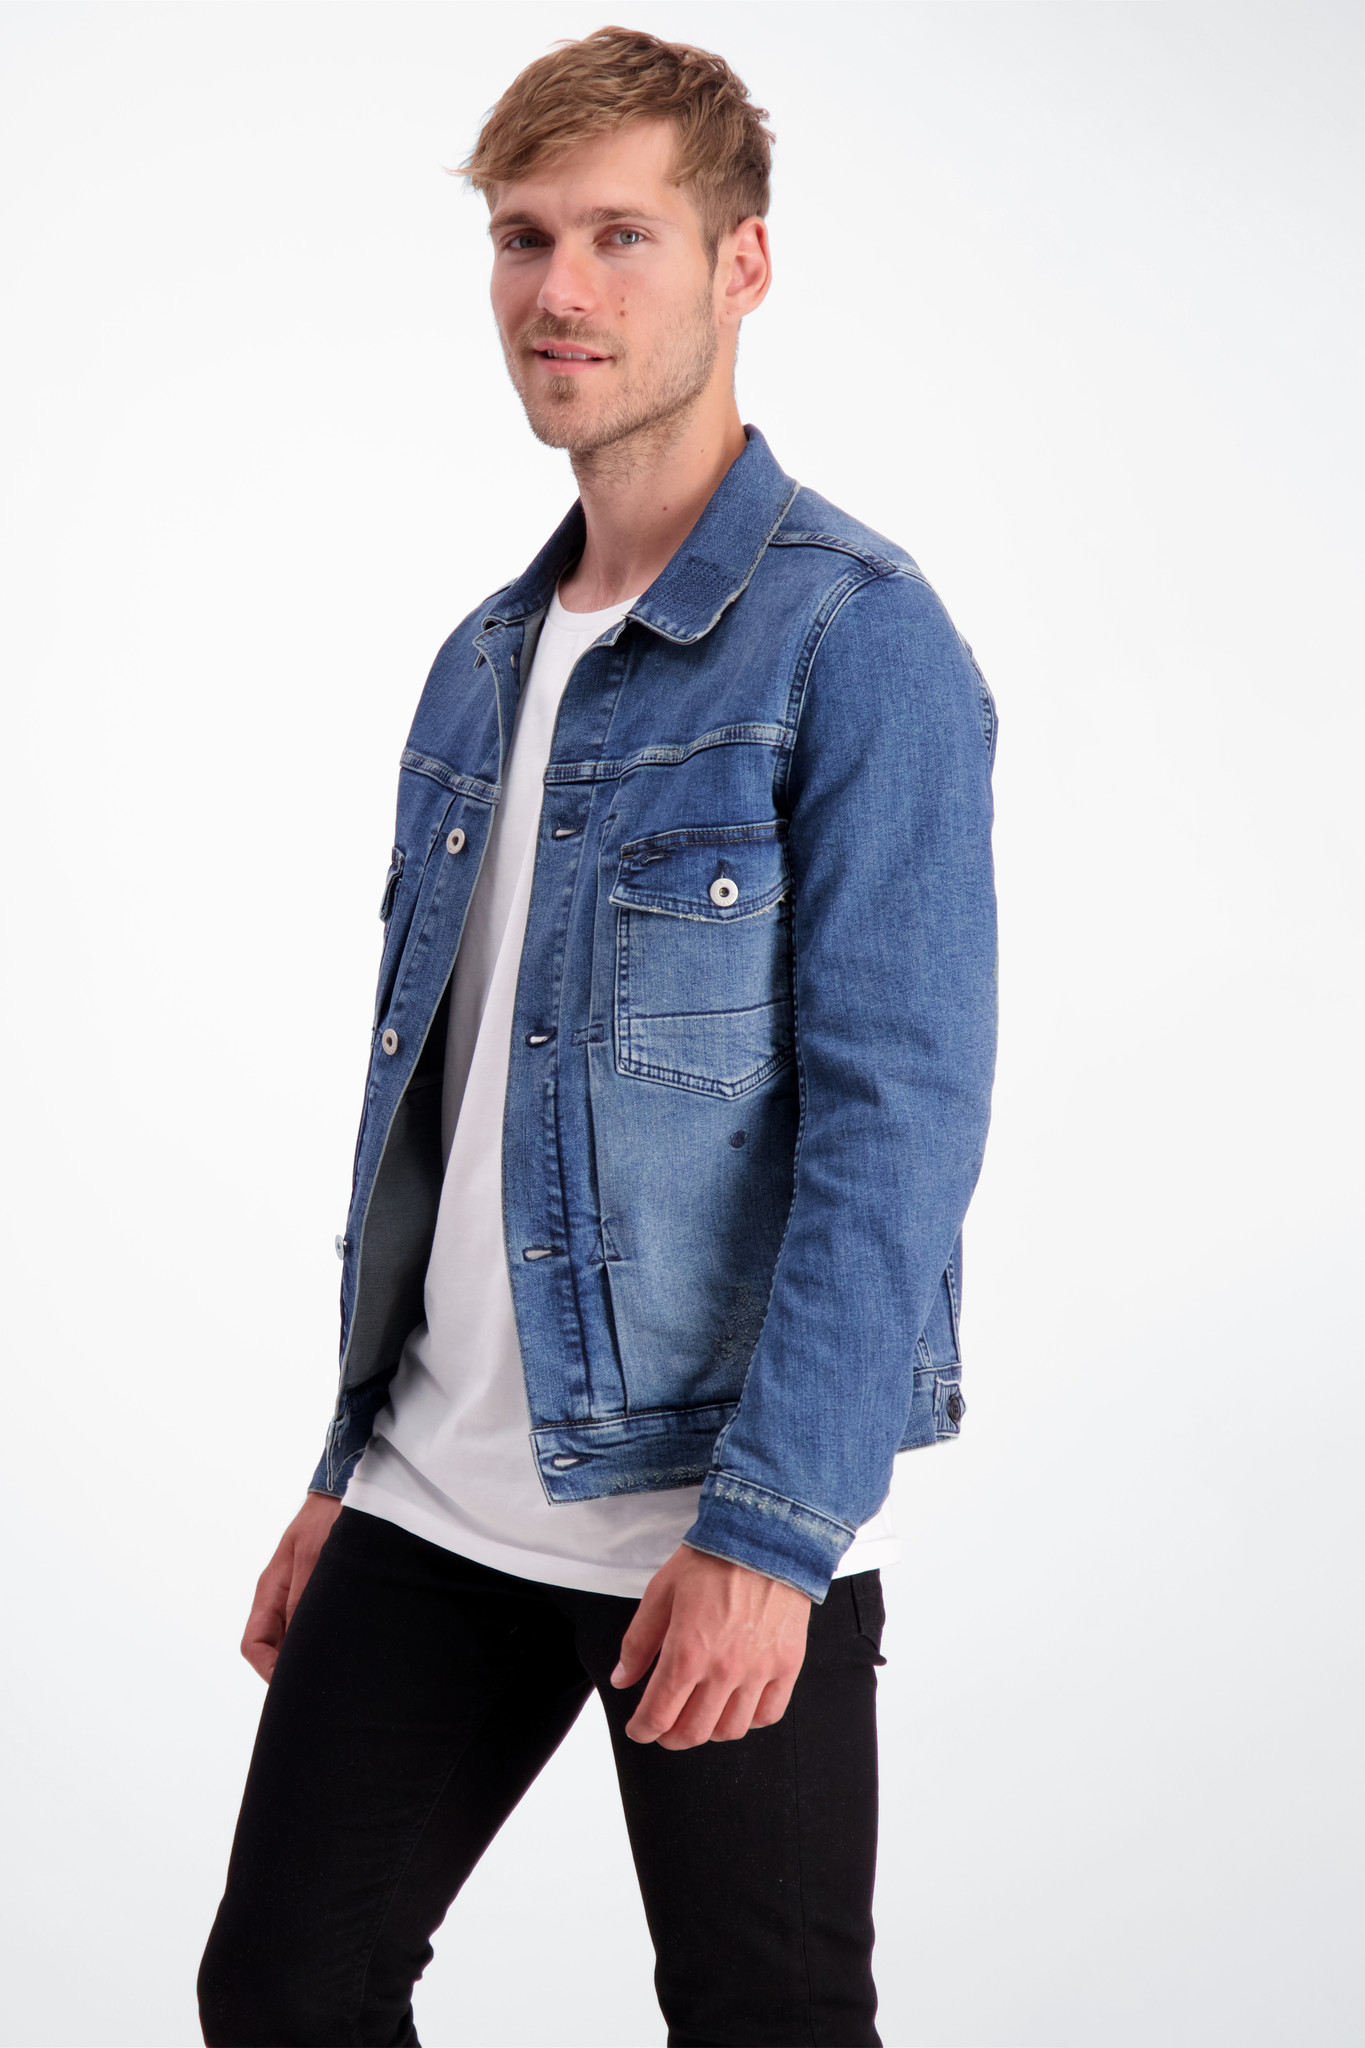 Mens Jackets Mens Retro Ripped Denim Jacket Fashion Washed Denim Top  Outerwear 230922 From Landong03, $26.96 | DHgate.Com